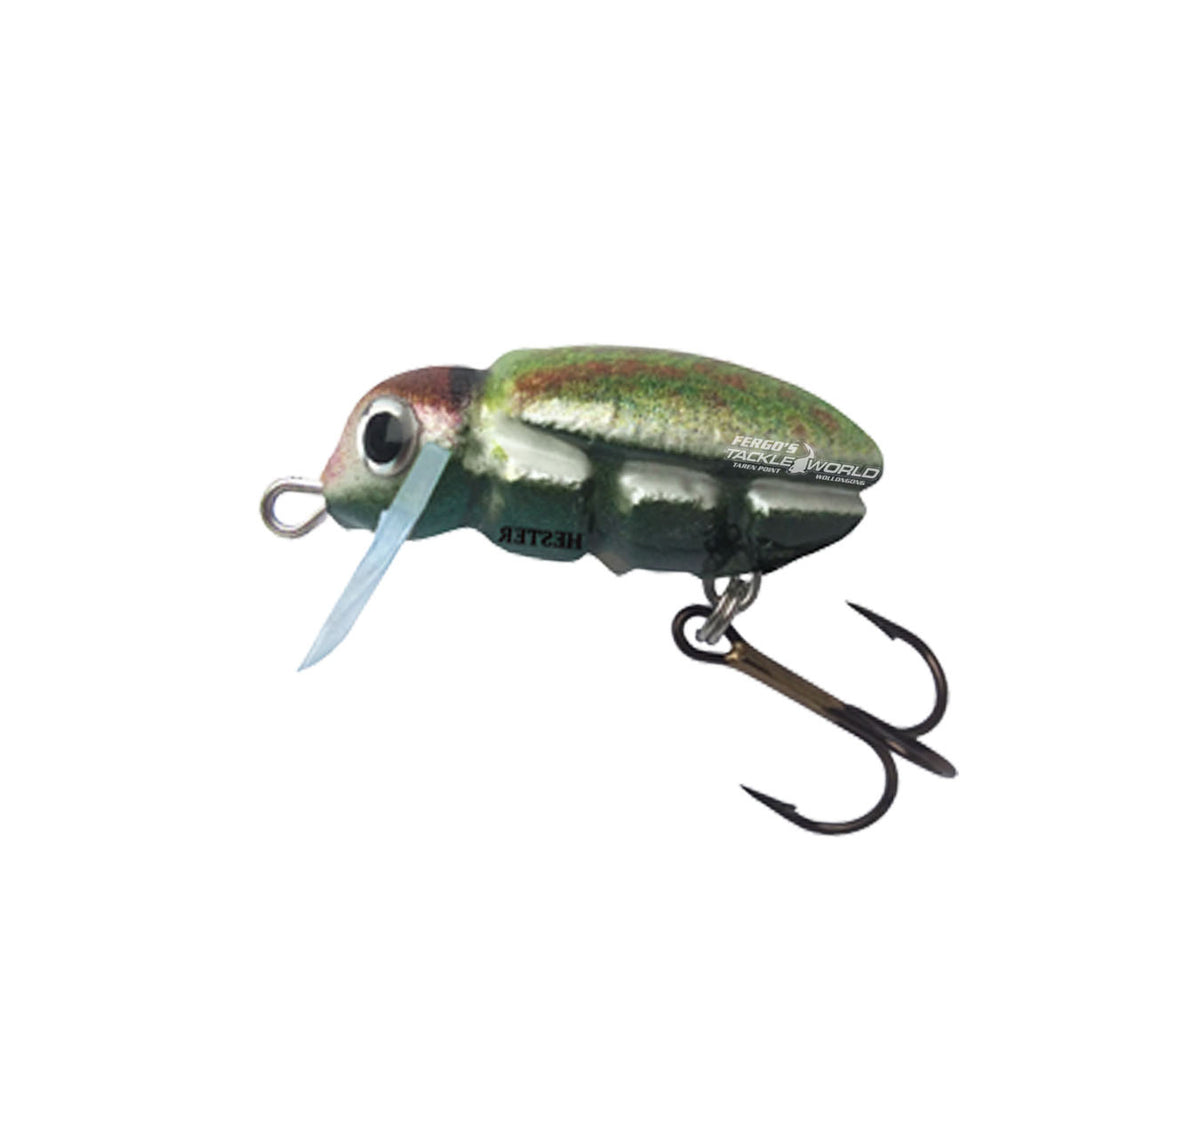 Hester Bug 1 Lures